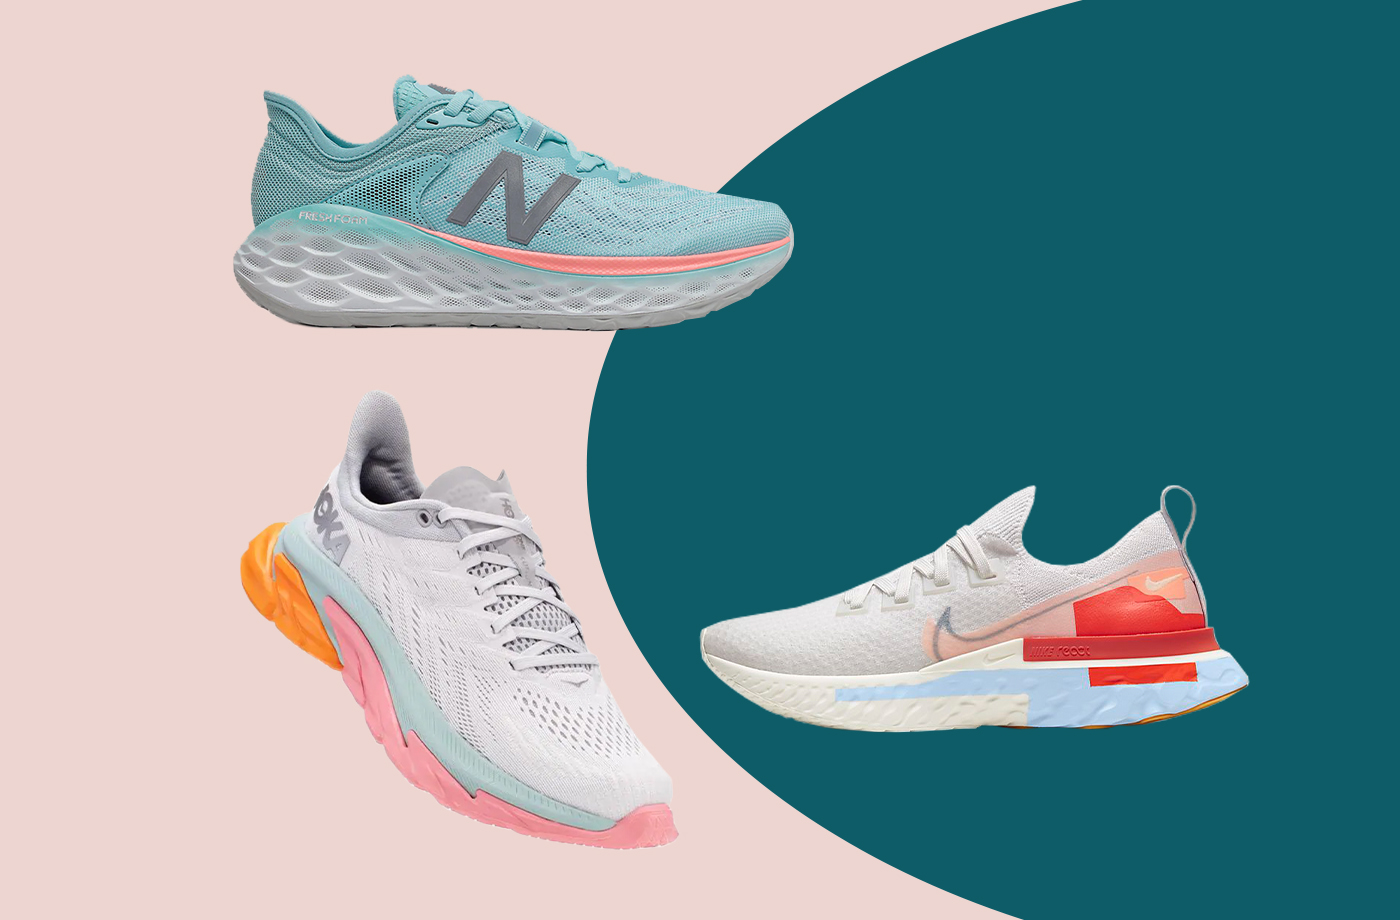 The 6 Best Running Shoes 2020 Has to 